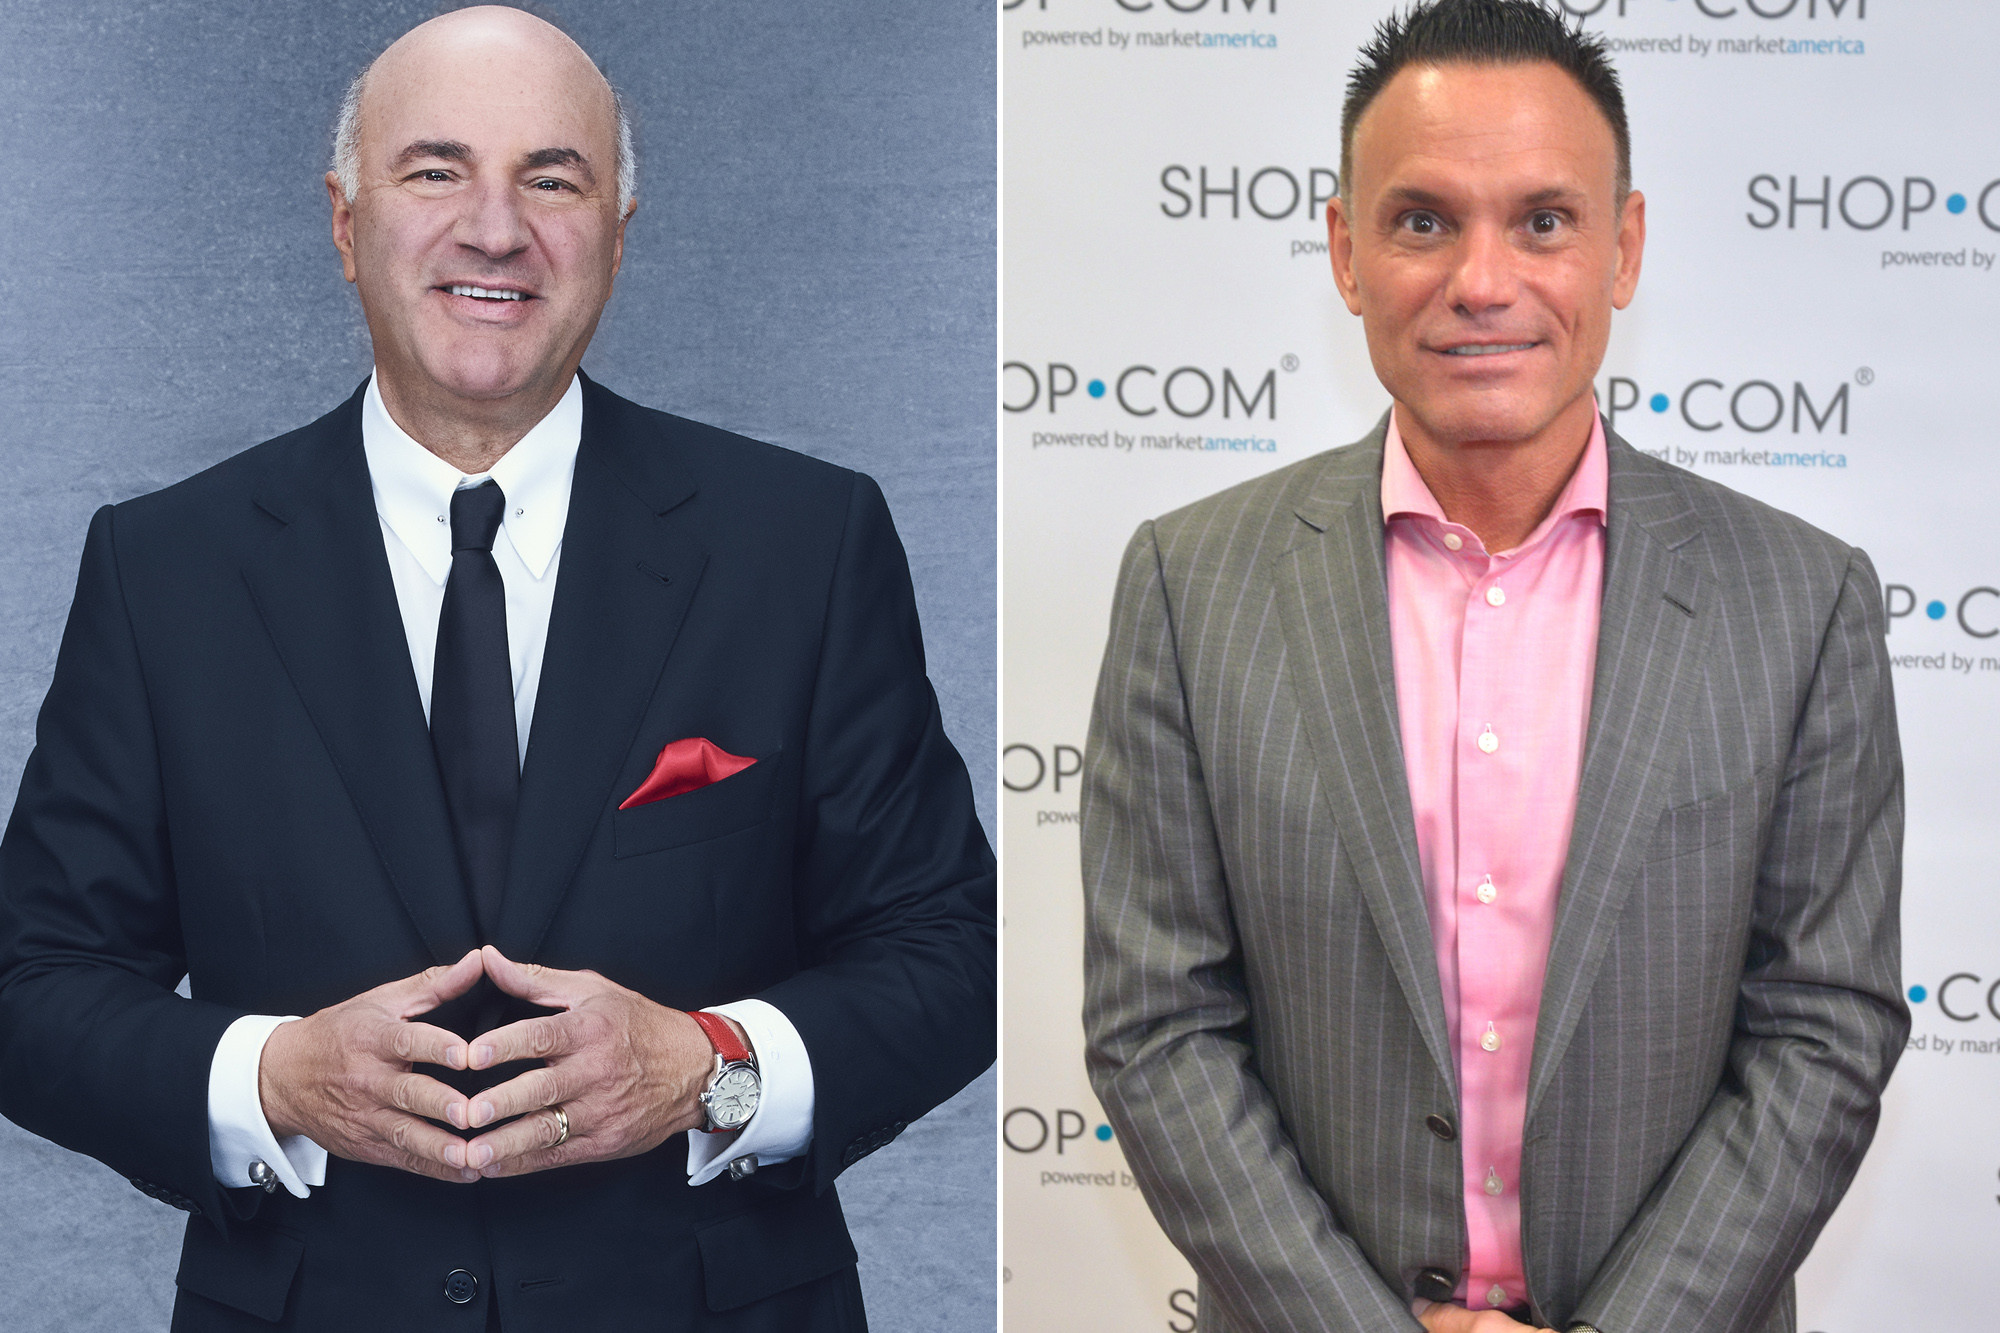 Shark Tank Kevin O Leary And Kevin Harrington Accused Of Fraud Scamming Potential Entrepreneurs!